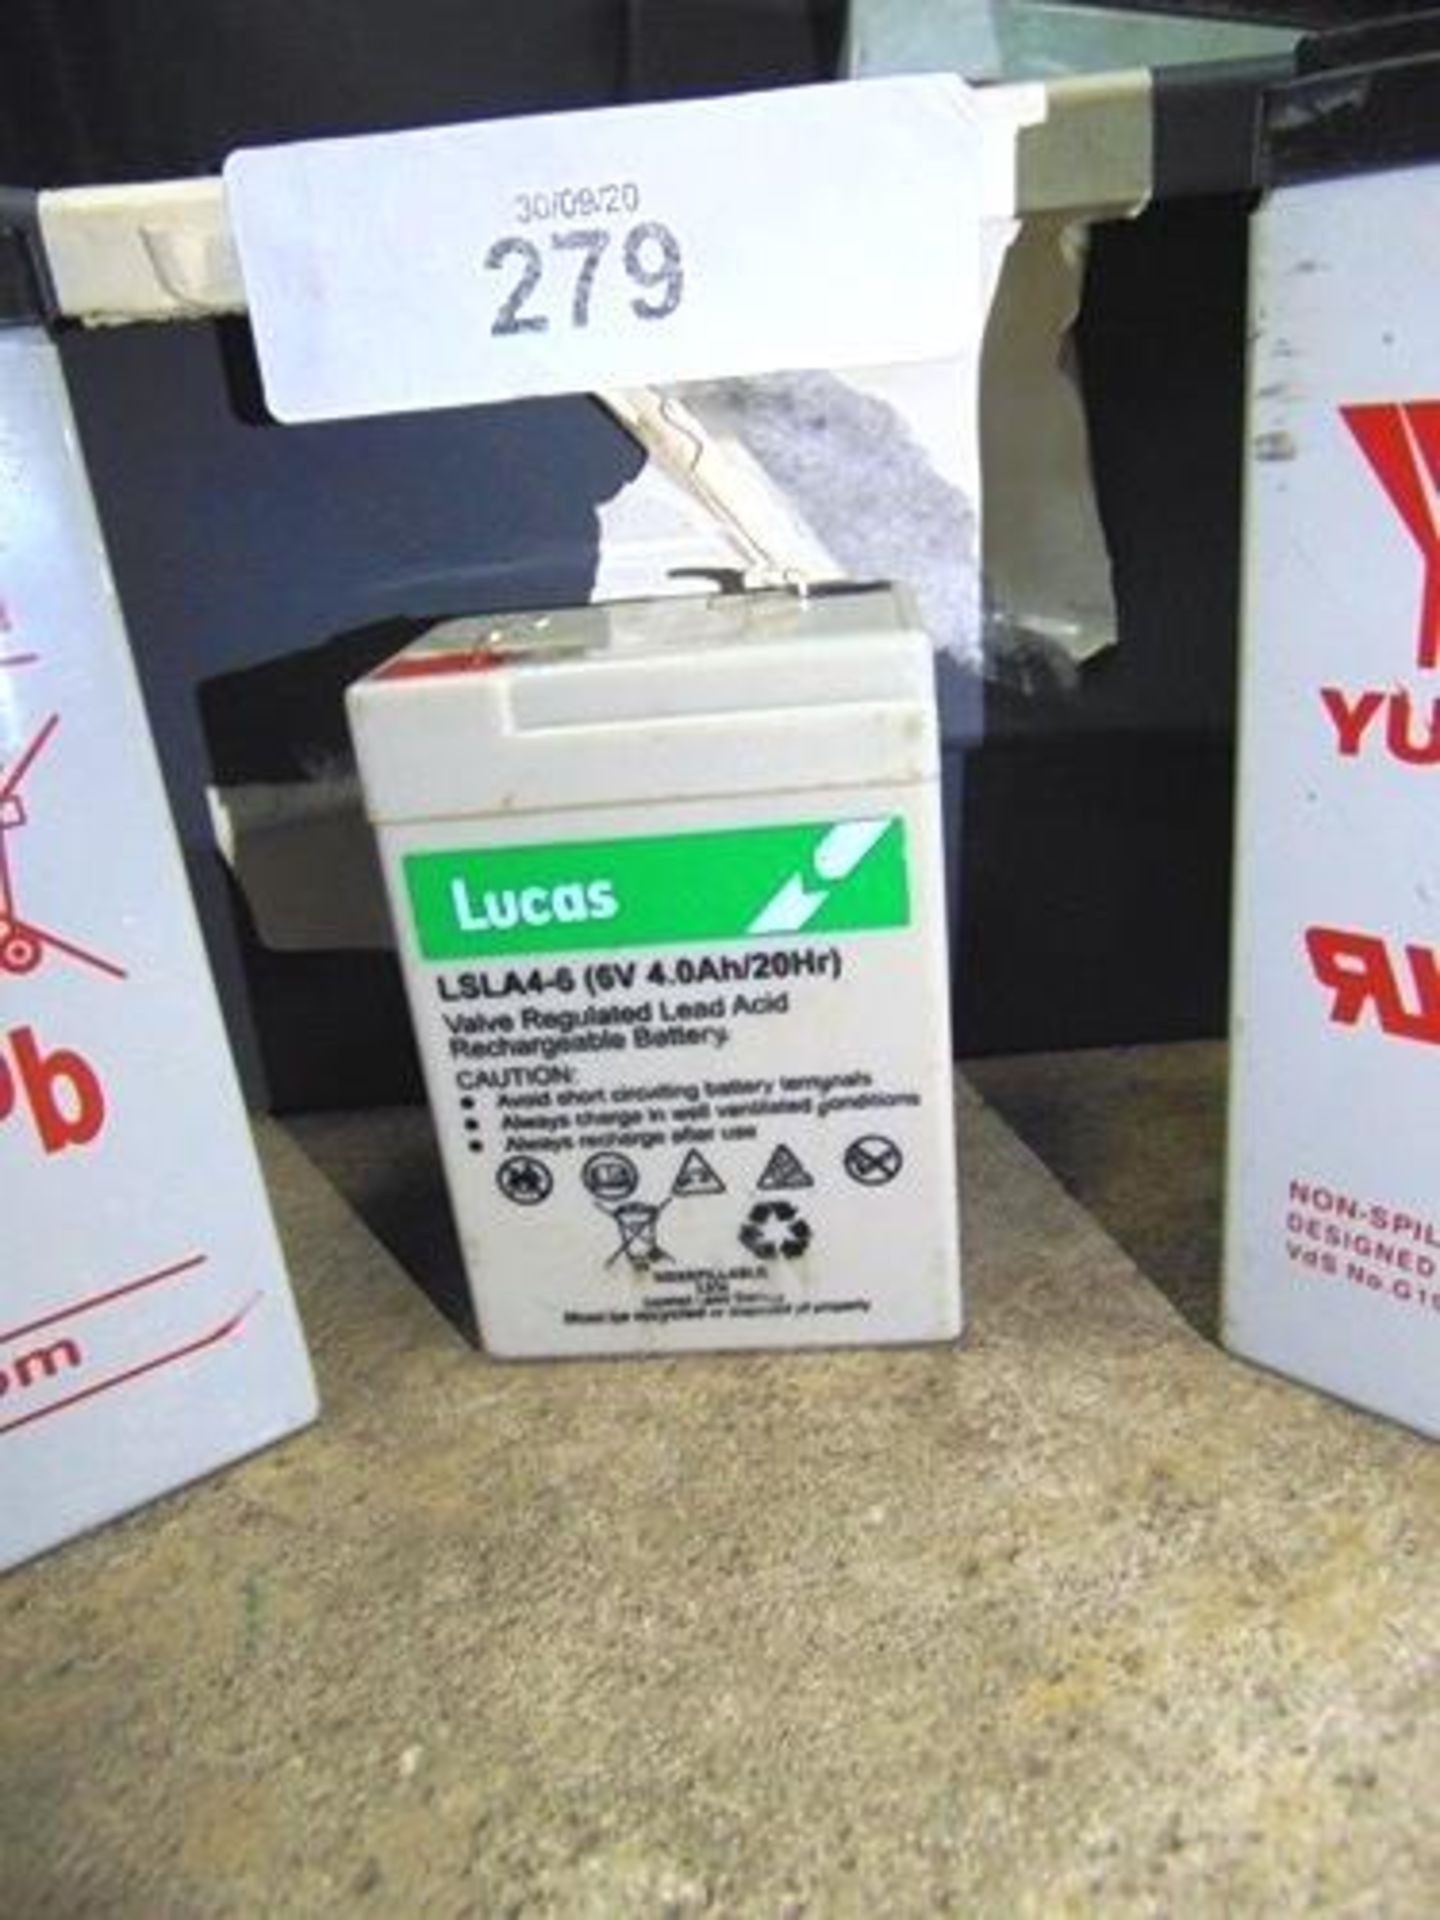 6 x Yuasa 12V 17ah batteries, together with 18 x Lucas LSLA 6V 4ah battery - New (GS7) - Image 2 of 4